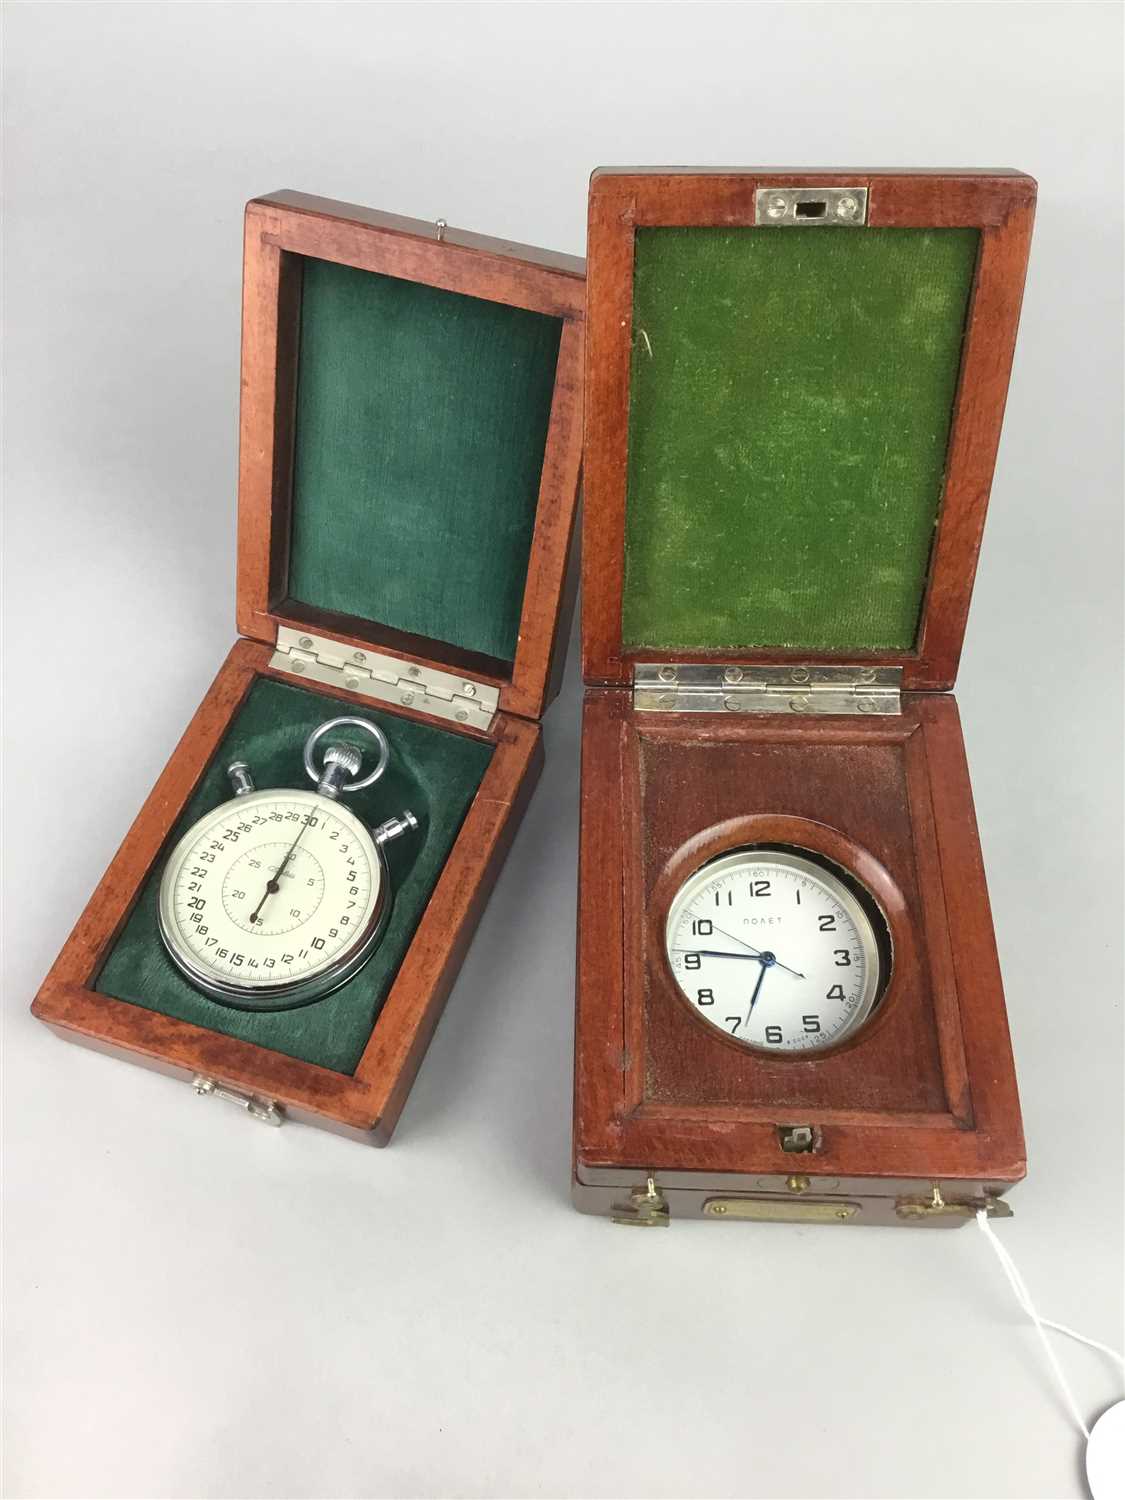 Lot 11 - A RUSSIAN TRAVELLING TIME PIECE AND A STOP WATCH